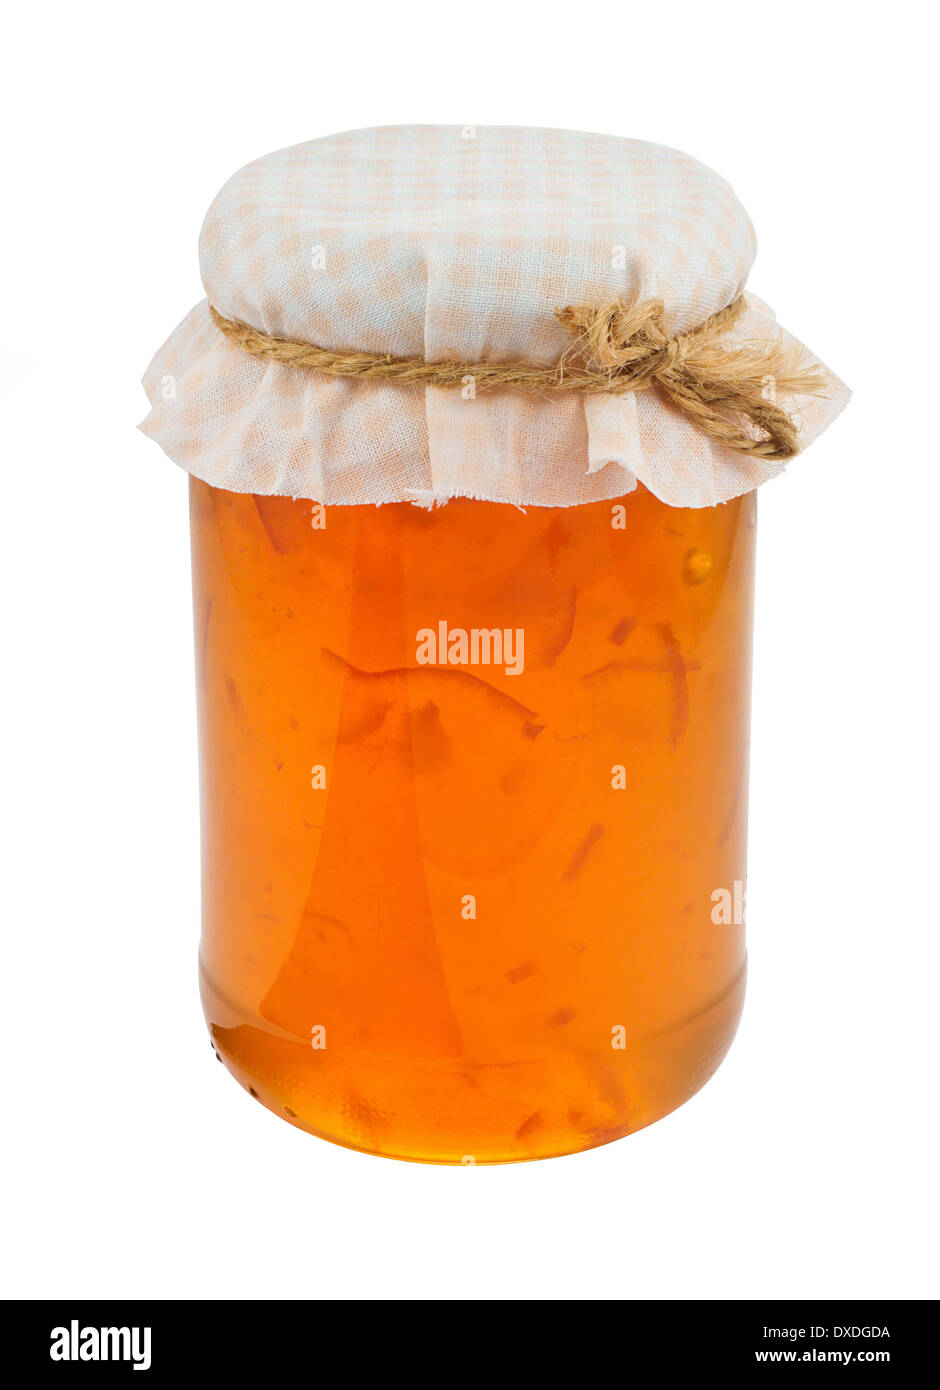 Marmalade a popular fruit preserve in a jar with traditional cloth lid isolated against a white background Stock Photo